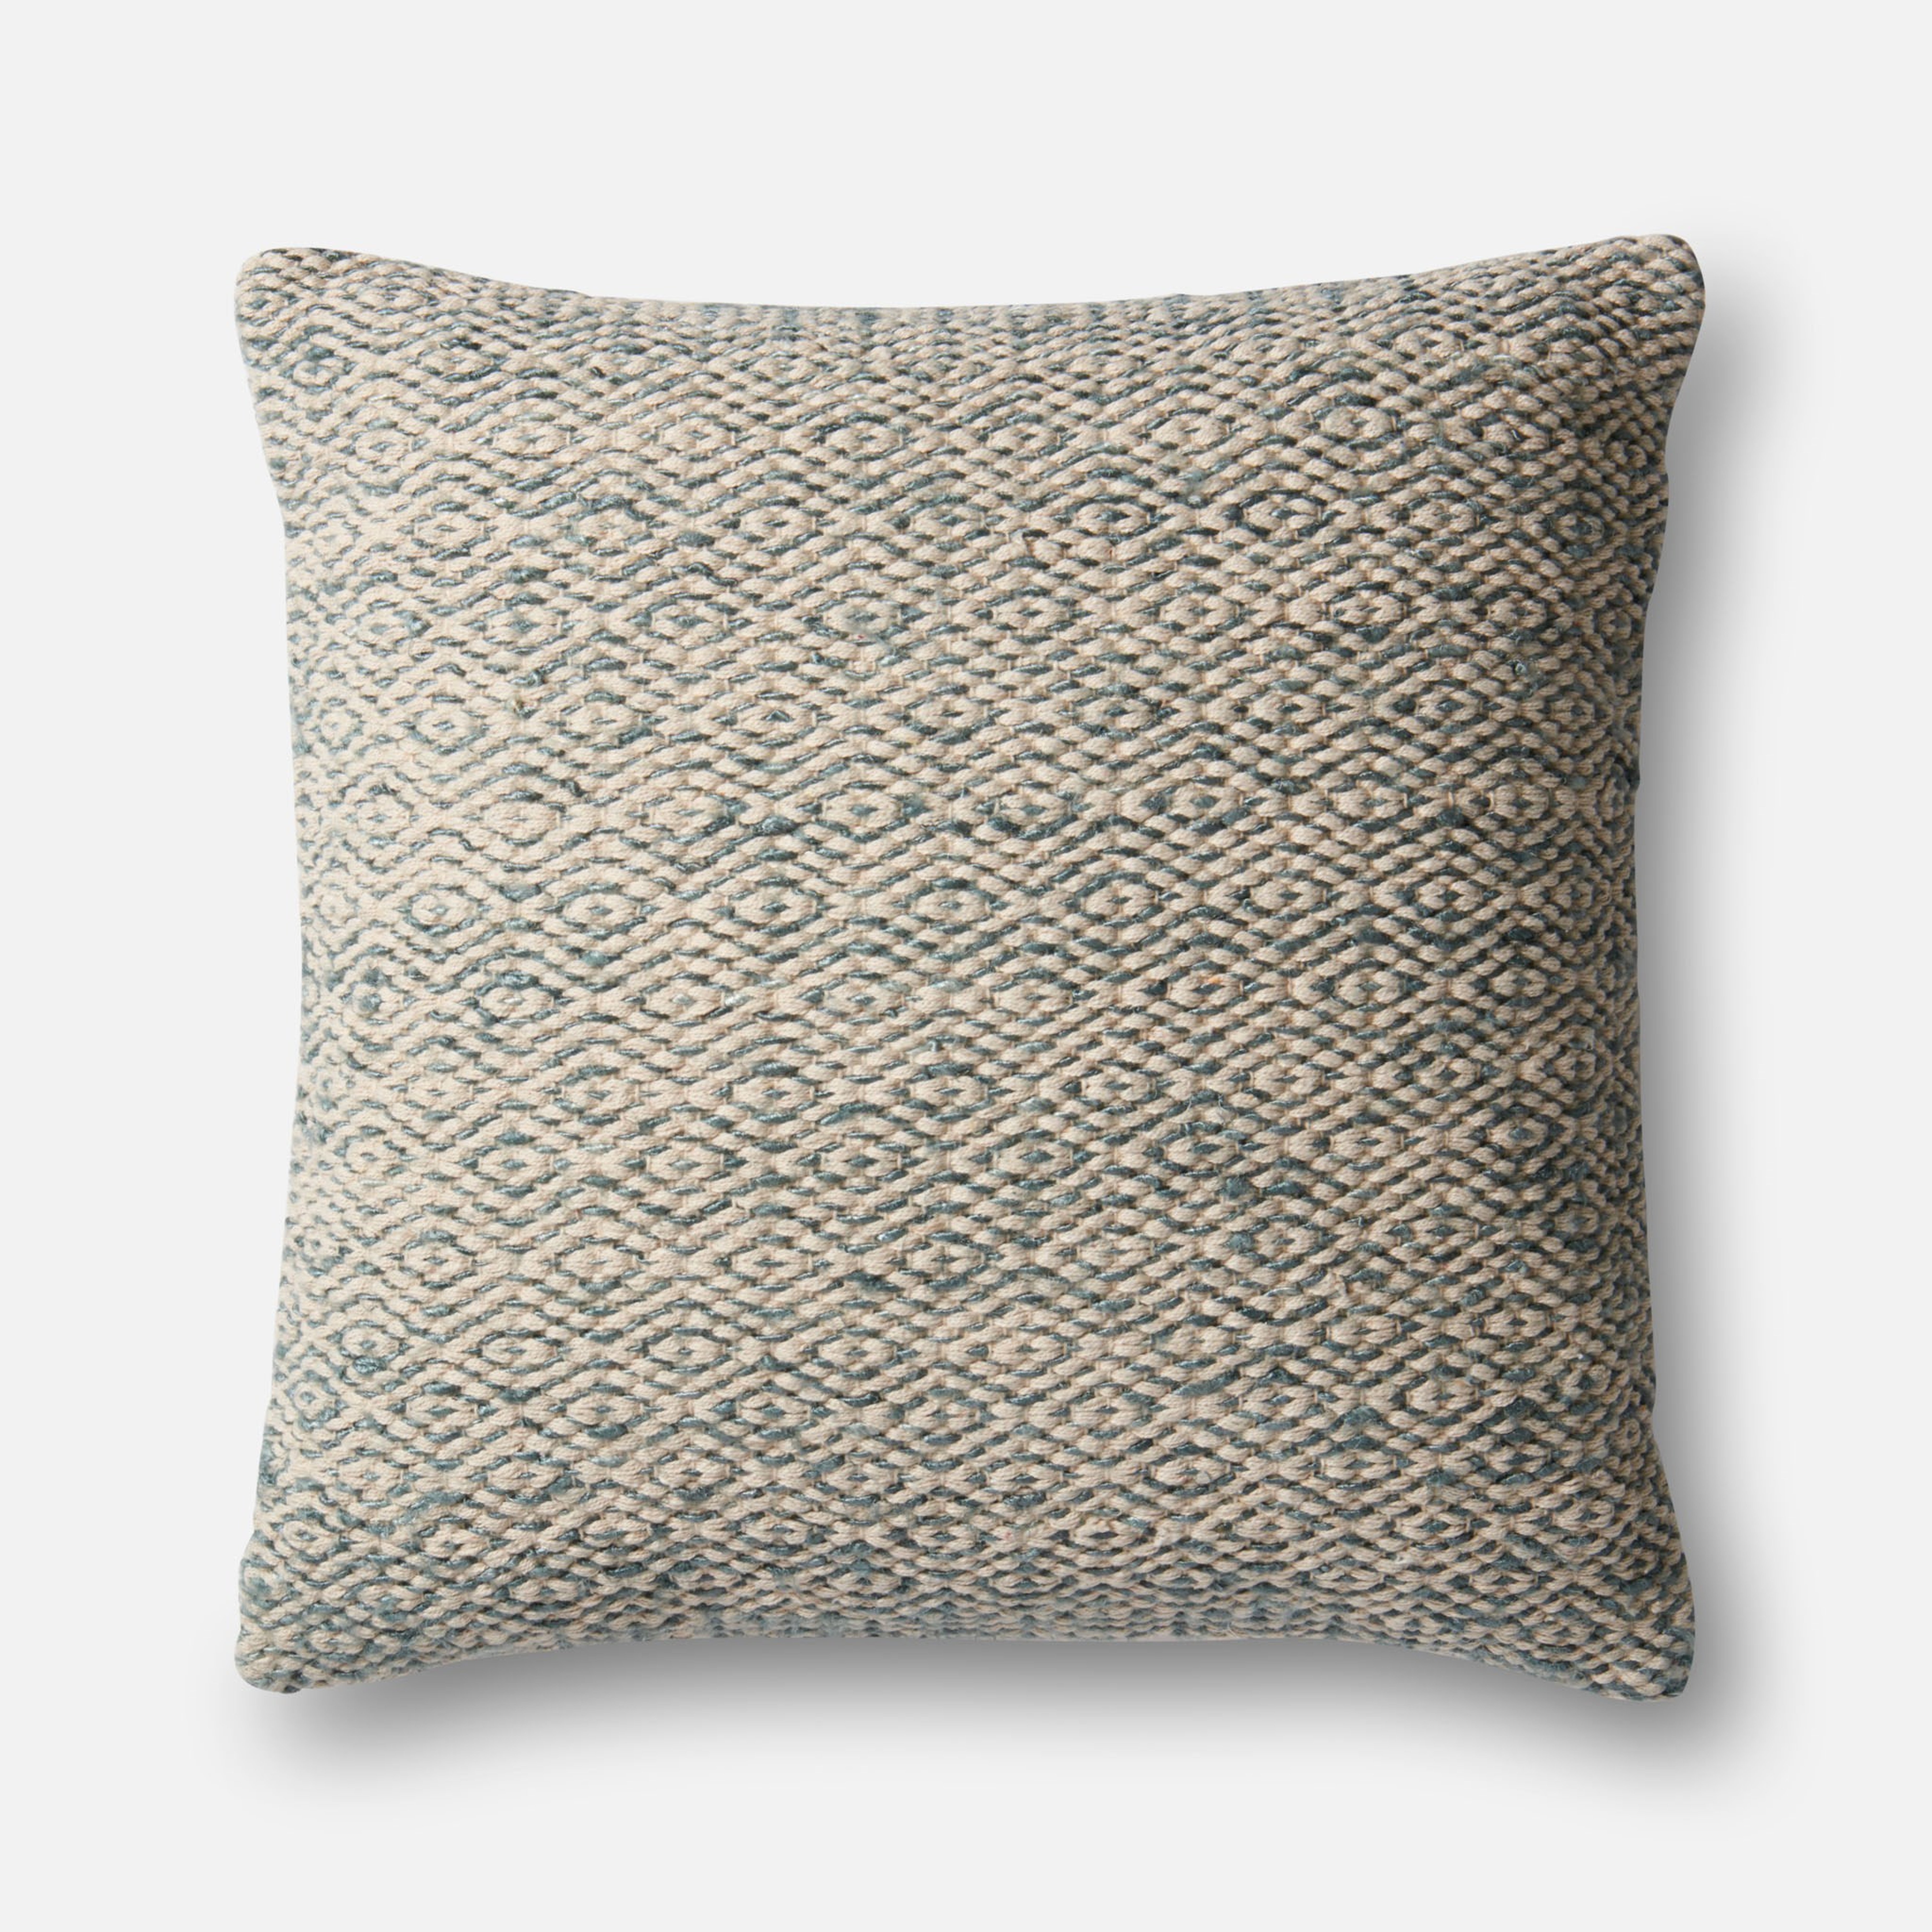 PILLOWS - GREY 22x22 cover - Magnolia Home by Joana Gaines Crafted by Loloi Rugs